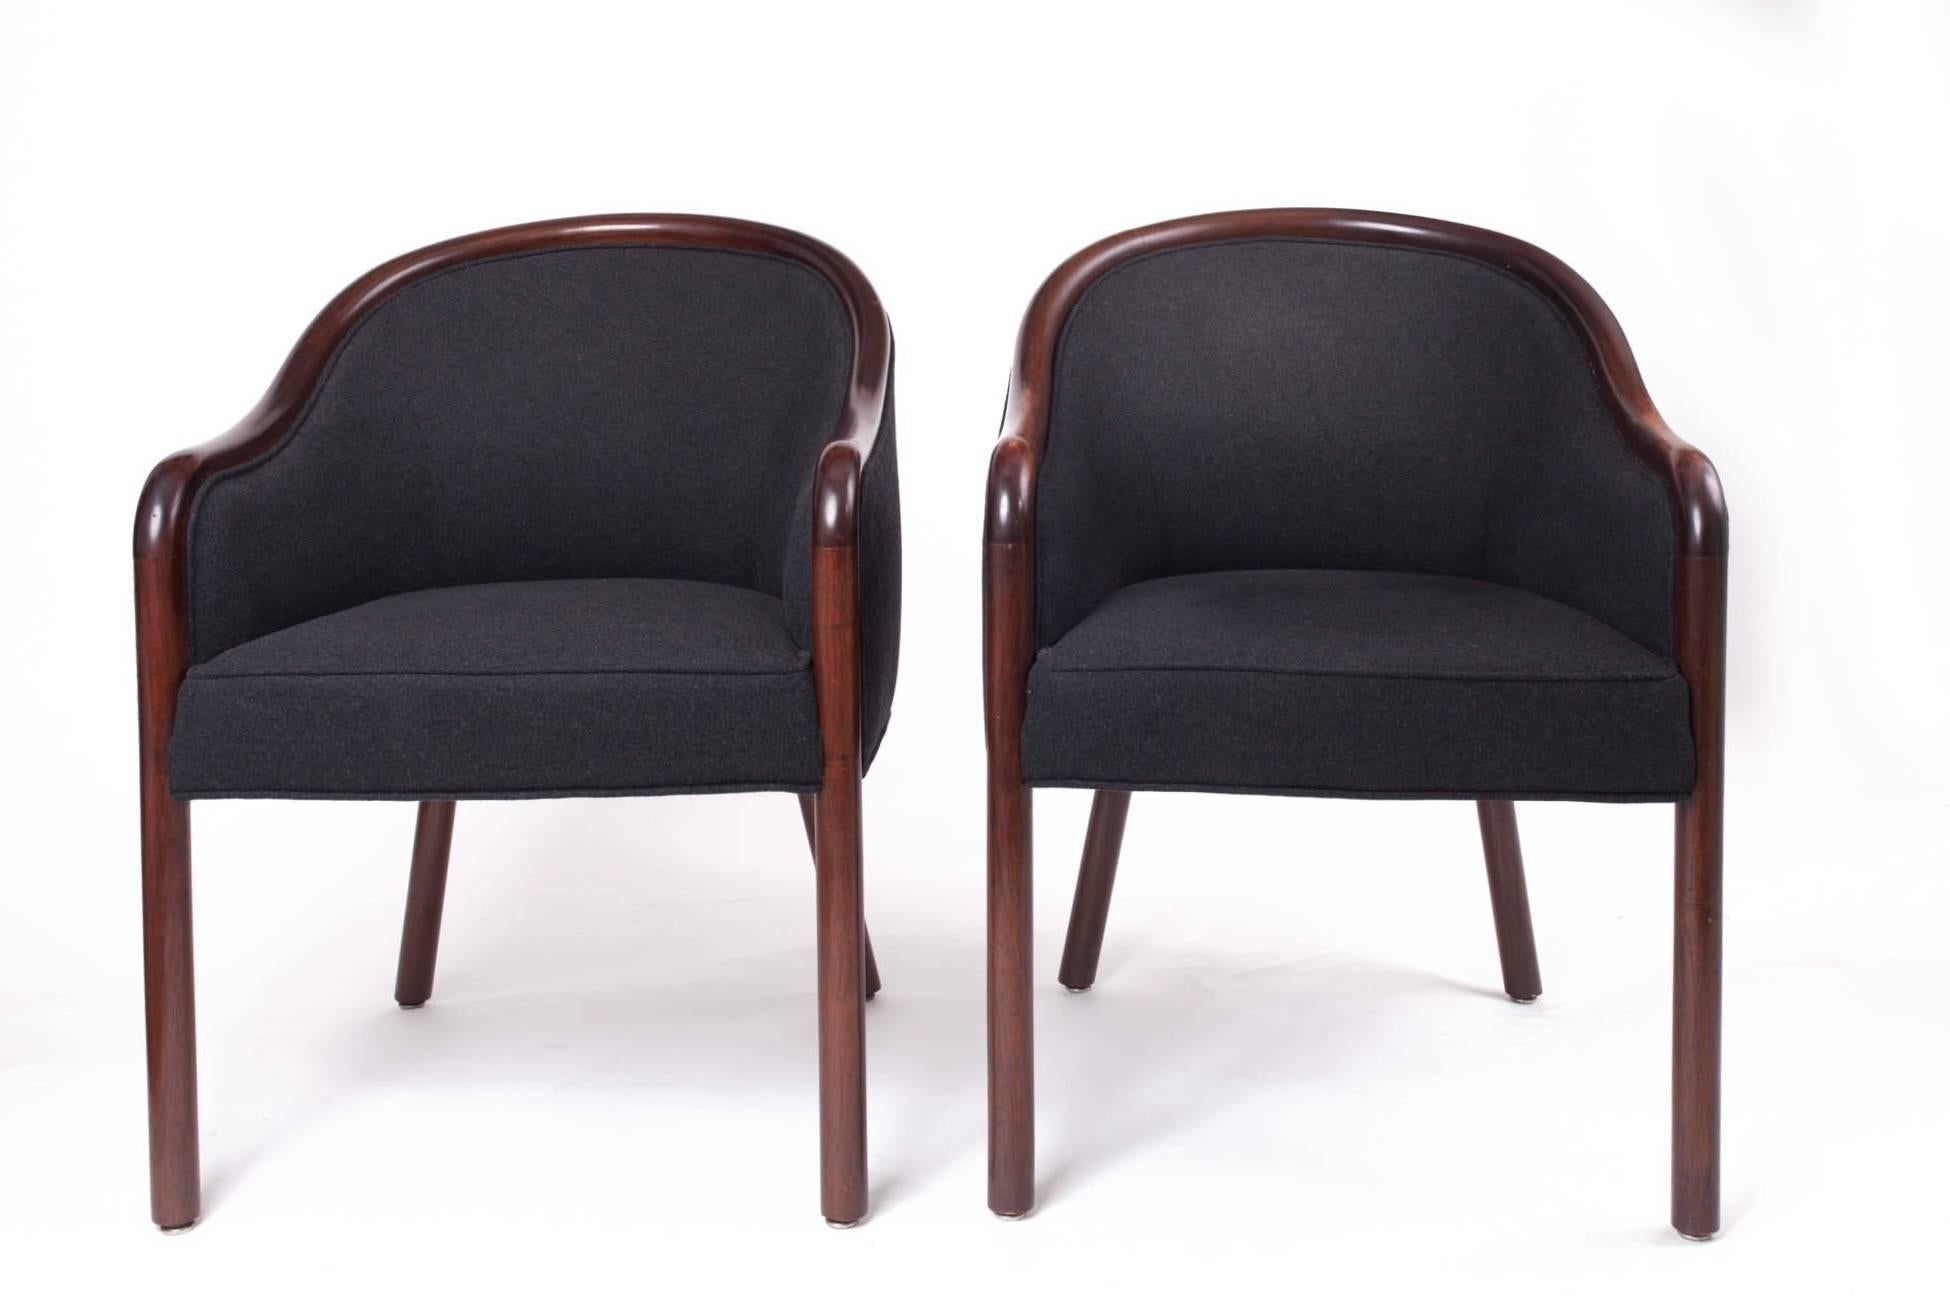 Ward Bennett (1917–2003)

A graceful and welcoming pair of club armchairs by Ward Bennett for Brickel Associates, with sinuous Bauhaus-influenced arms, a plush seat, and flared rounded back legs offset by straight rounded front legs. In a rich,